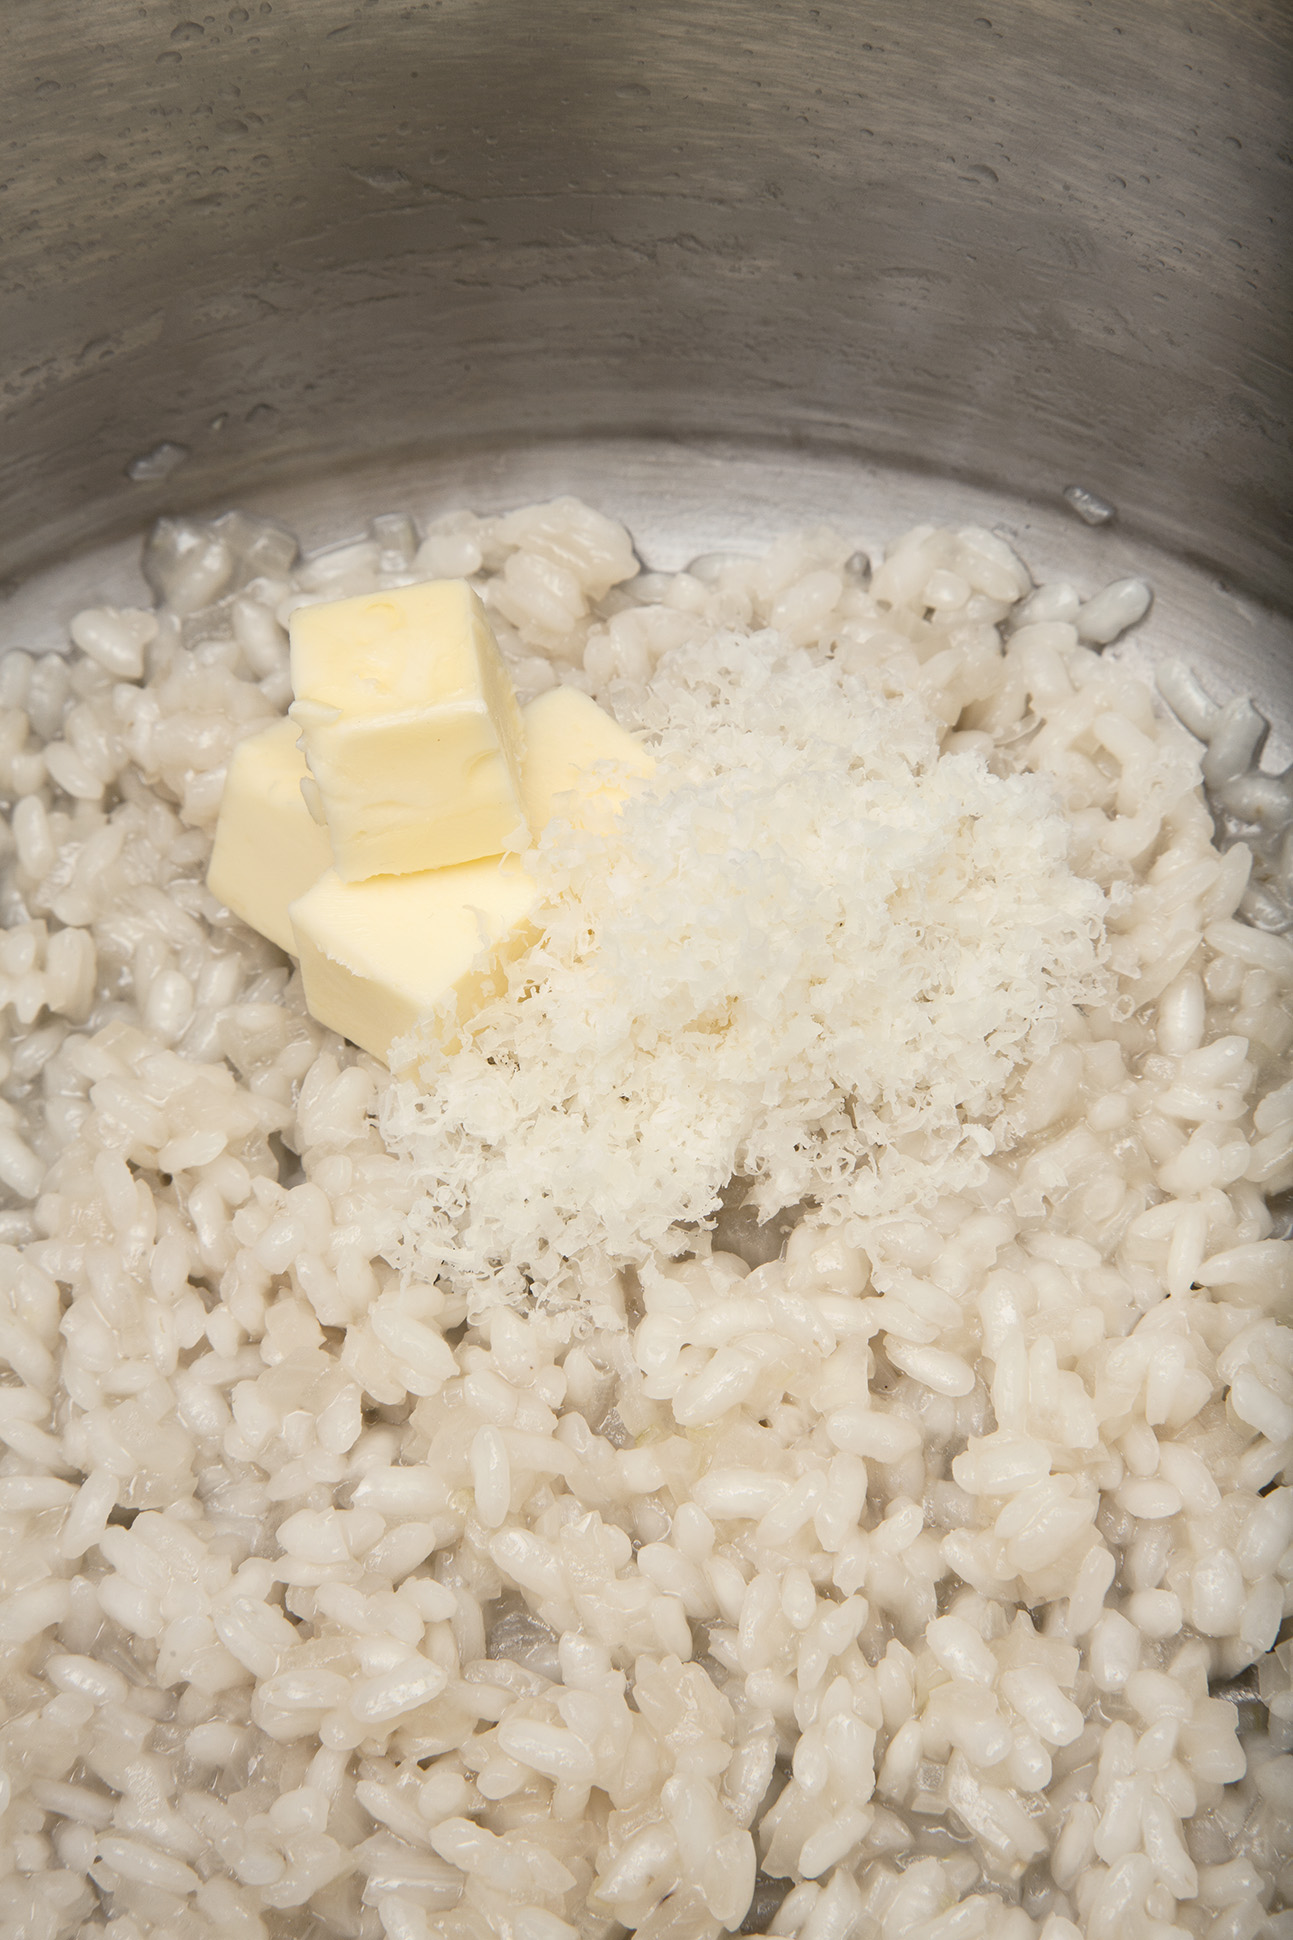 Adding butter or cheese at the end is called montecanto.